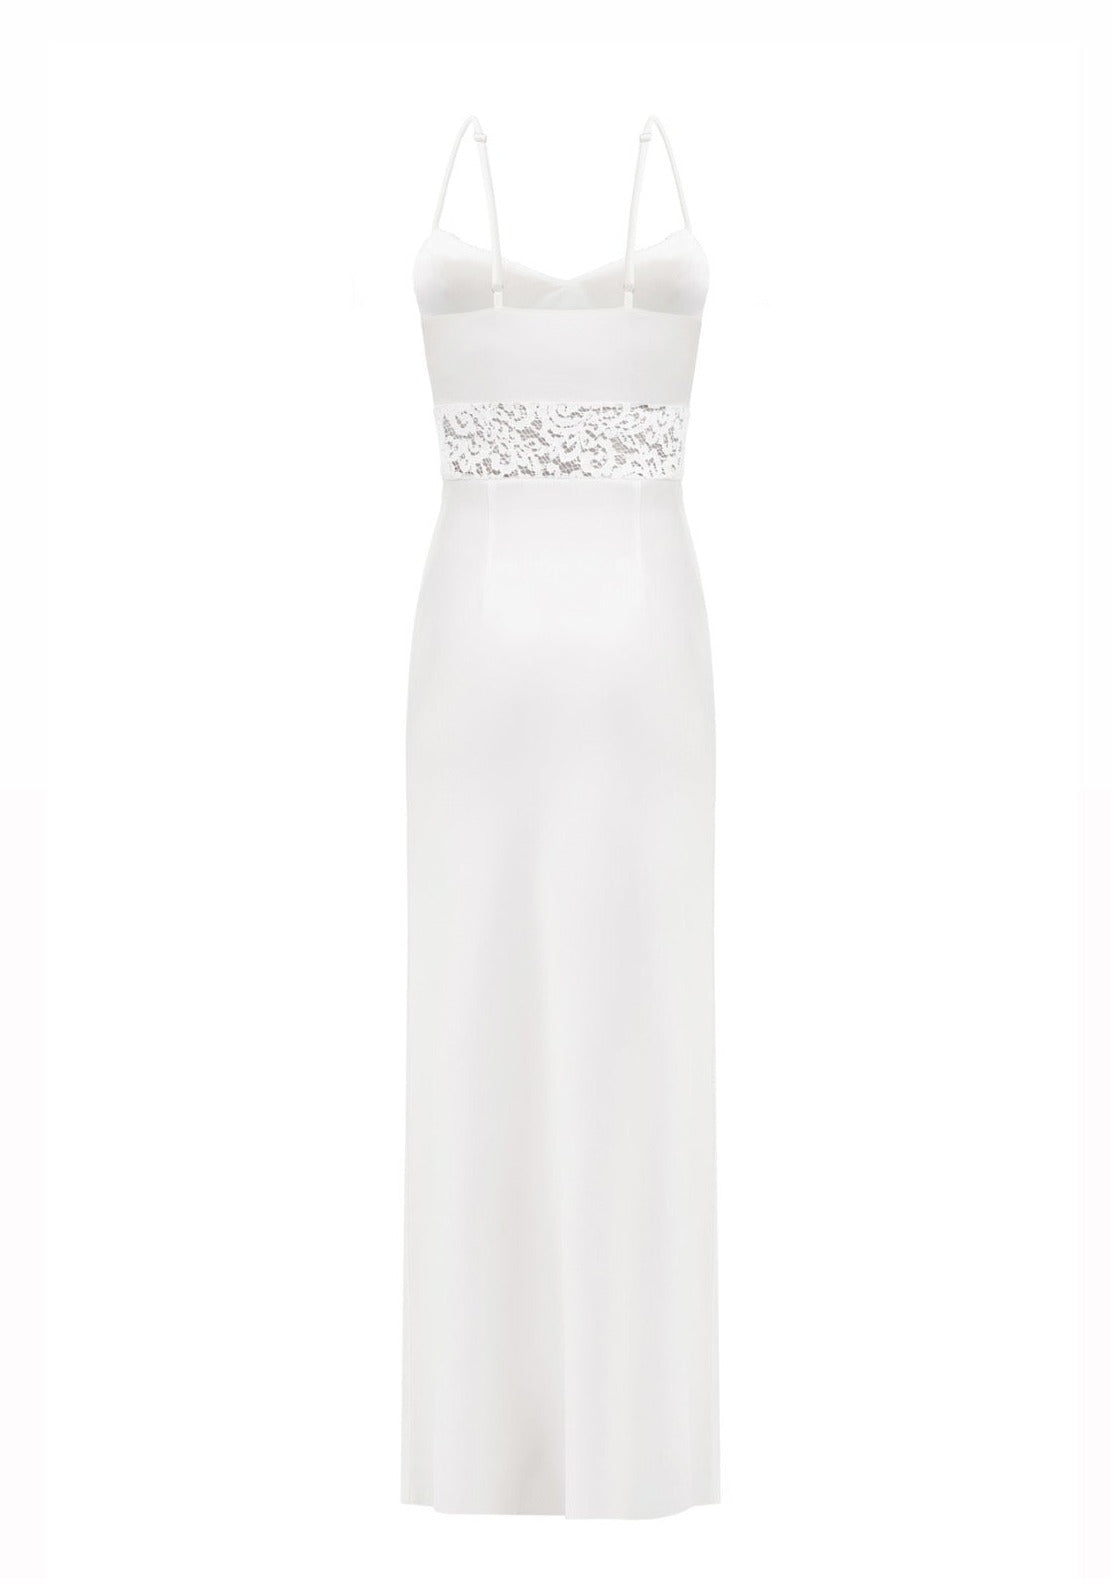 Long white satin dress with lace